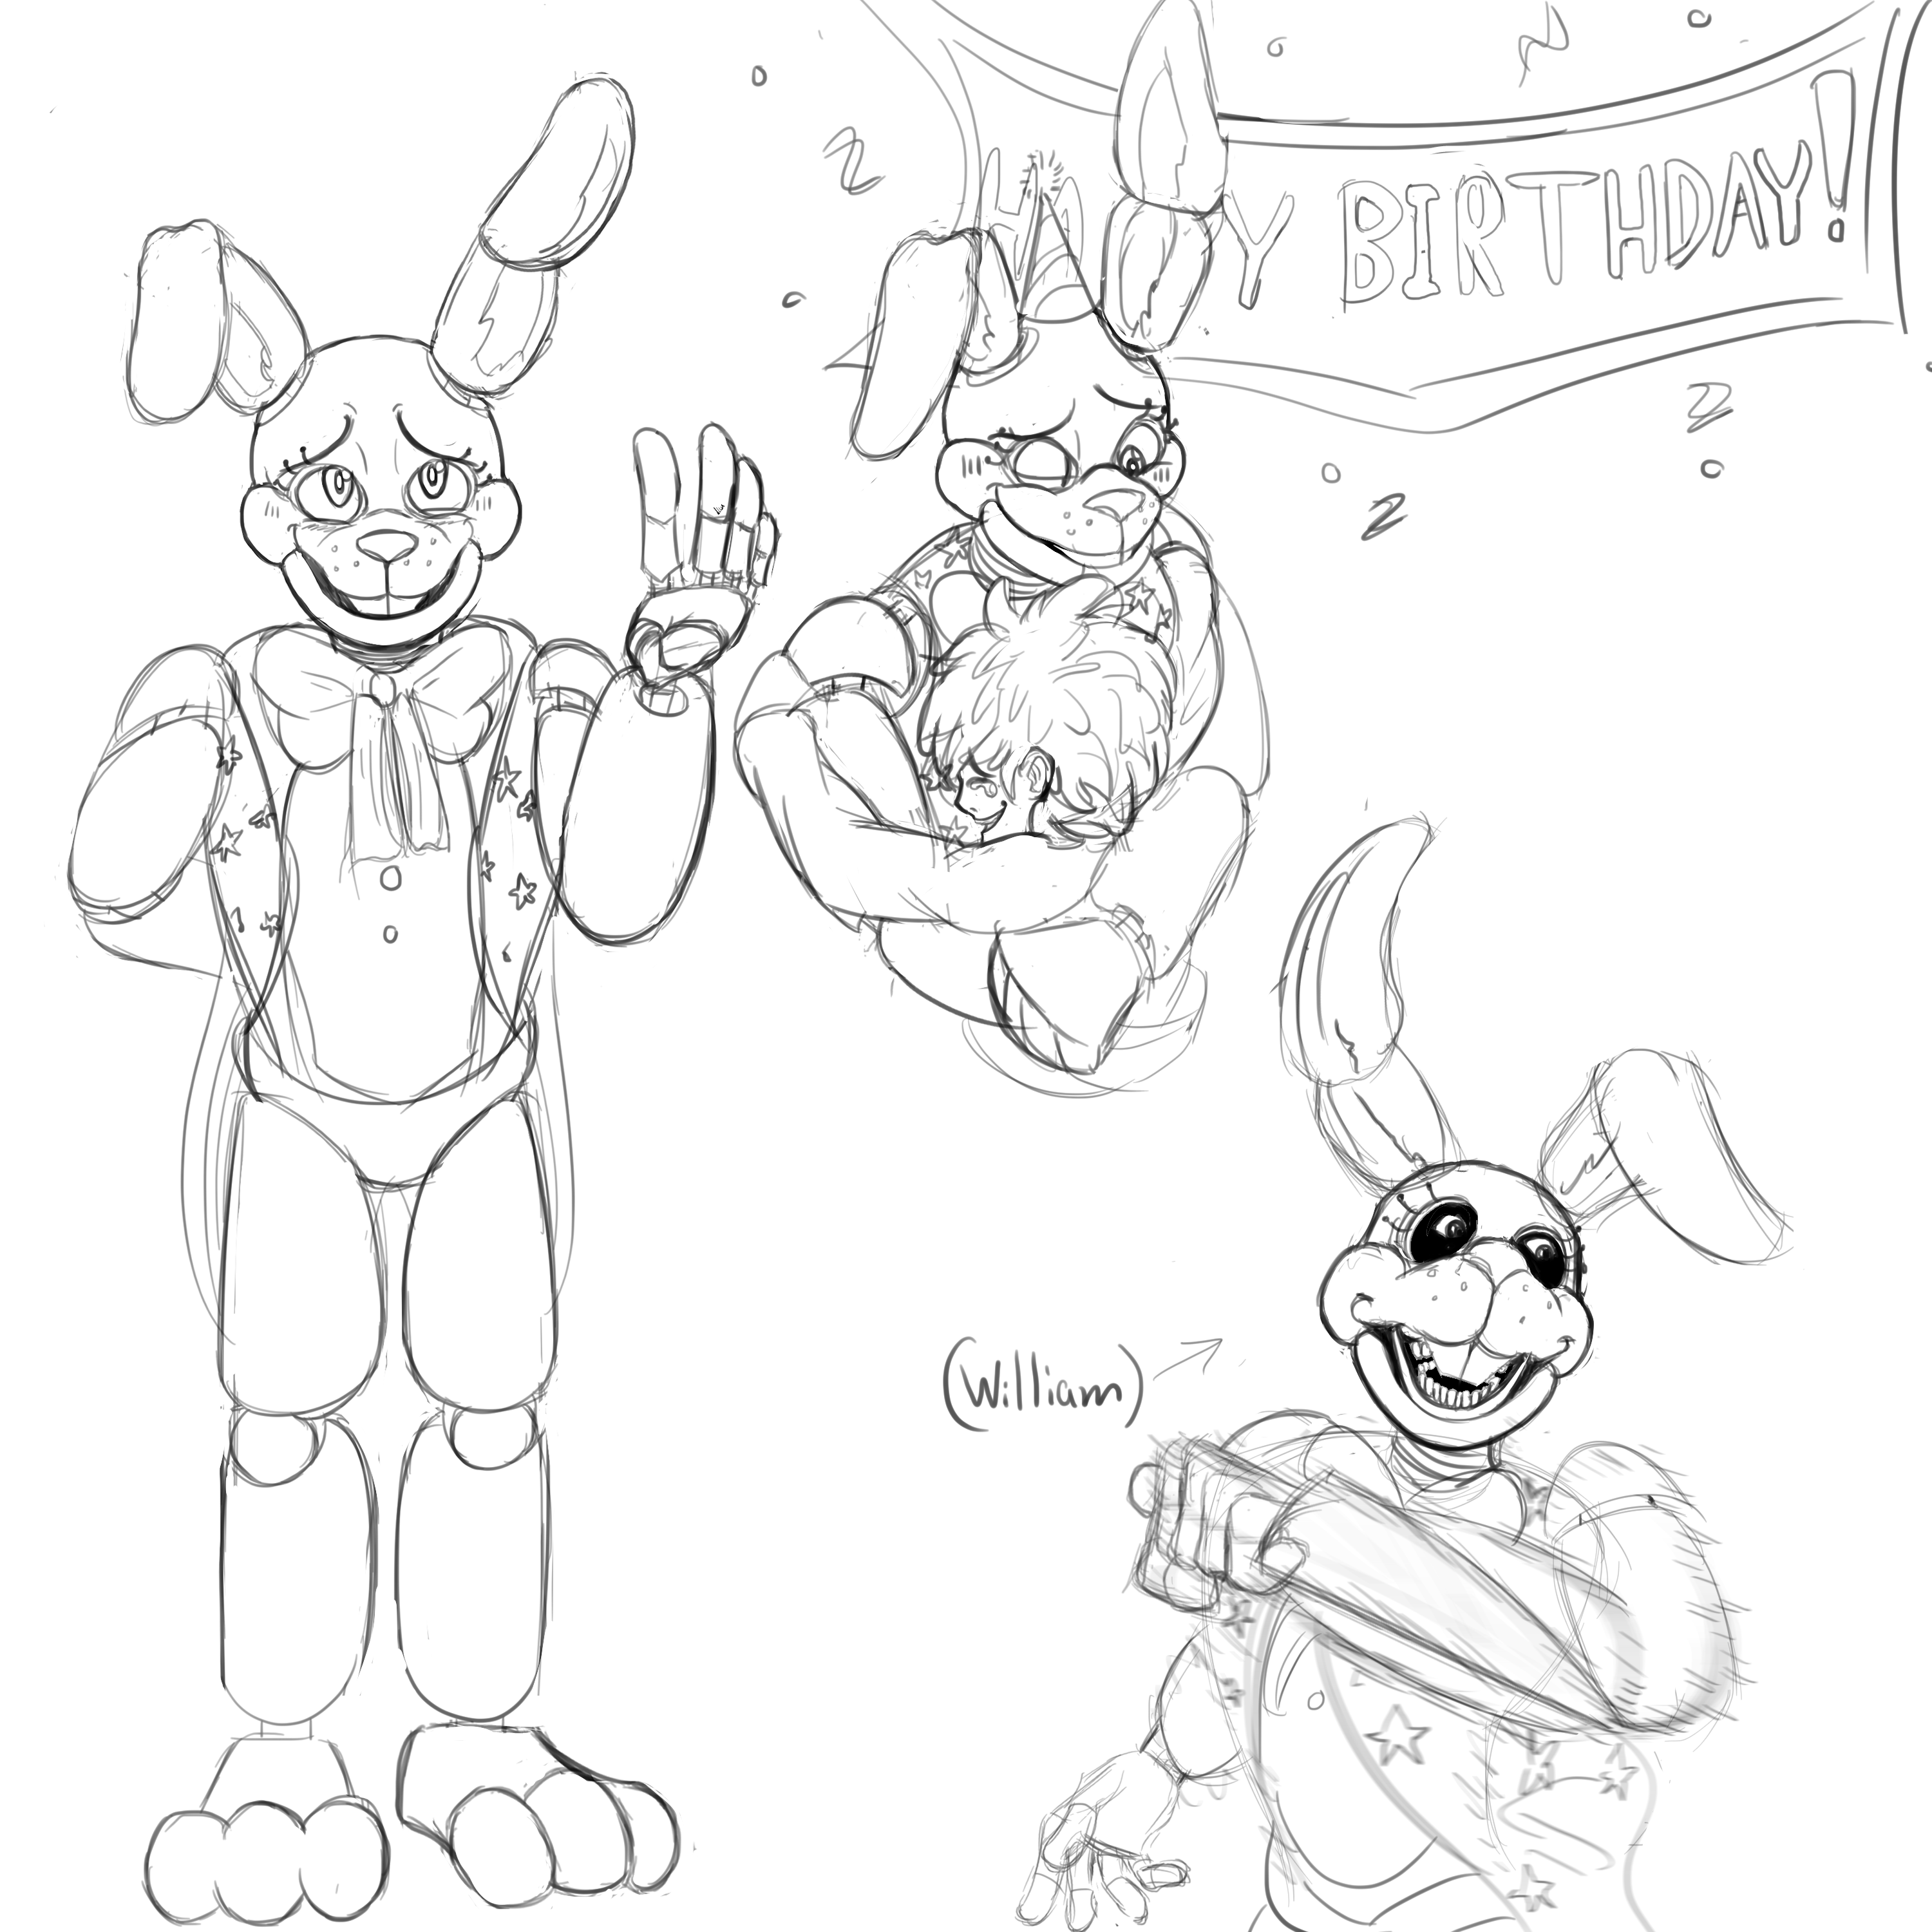 Some sketches of Spring Bonnie I did : r/fivenightsatfreddys